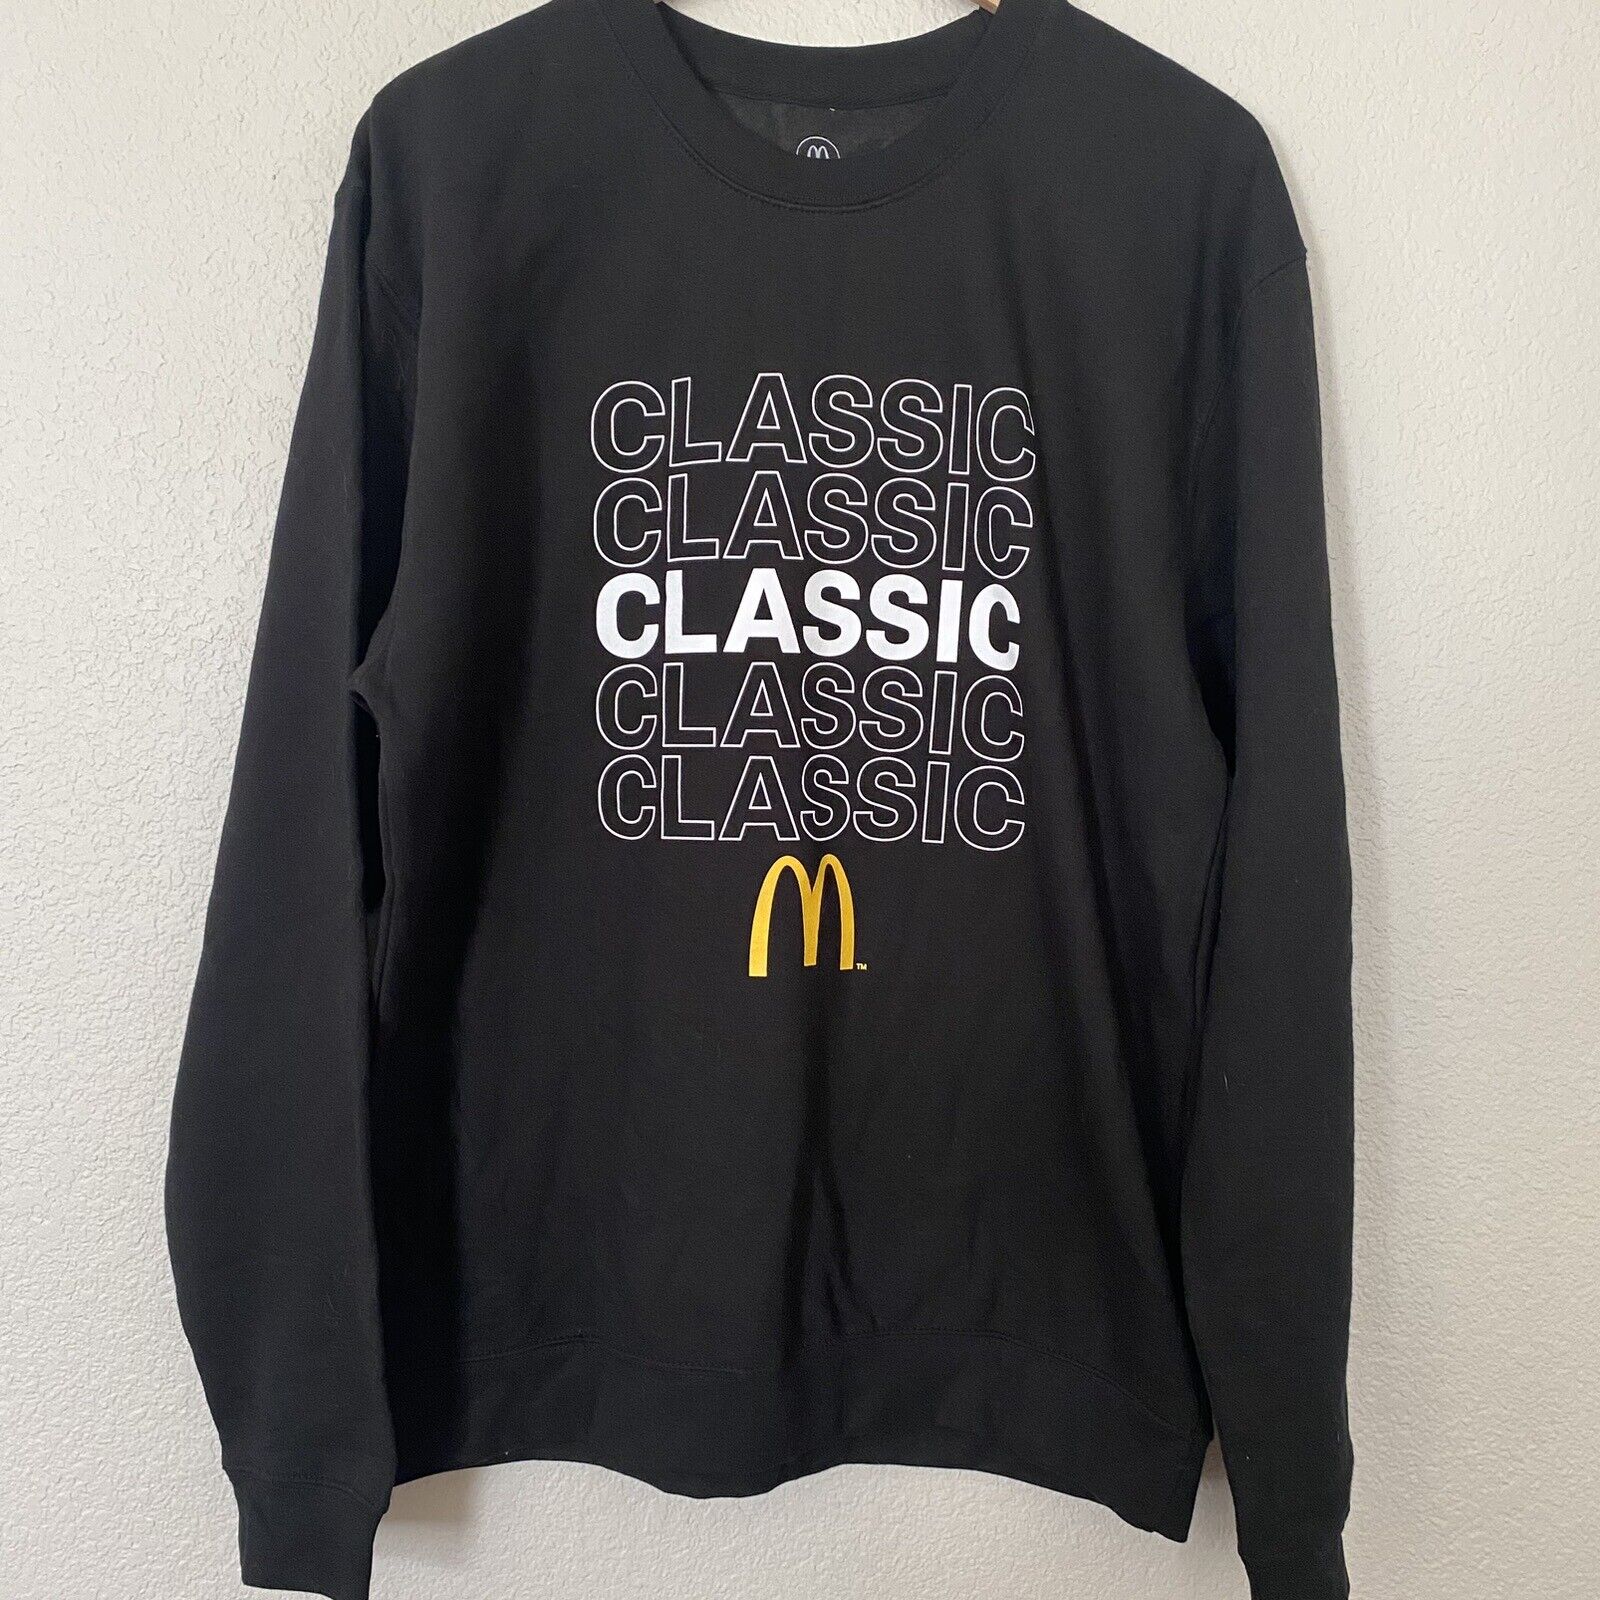 2018 McDonald\'s McDelivery Uber Eats Classic Black Limited Ed Sweater L NWOT